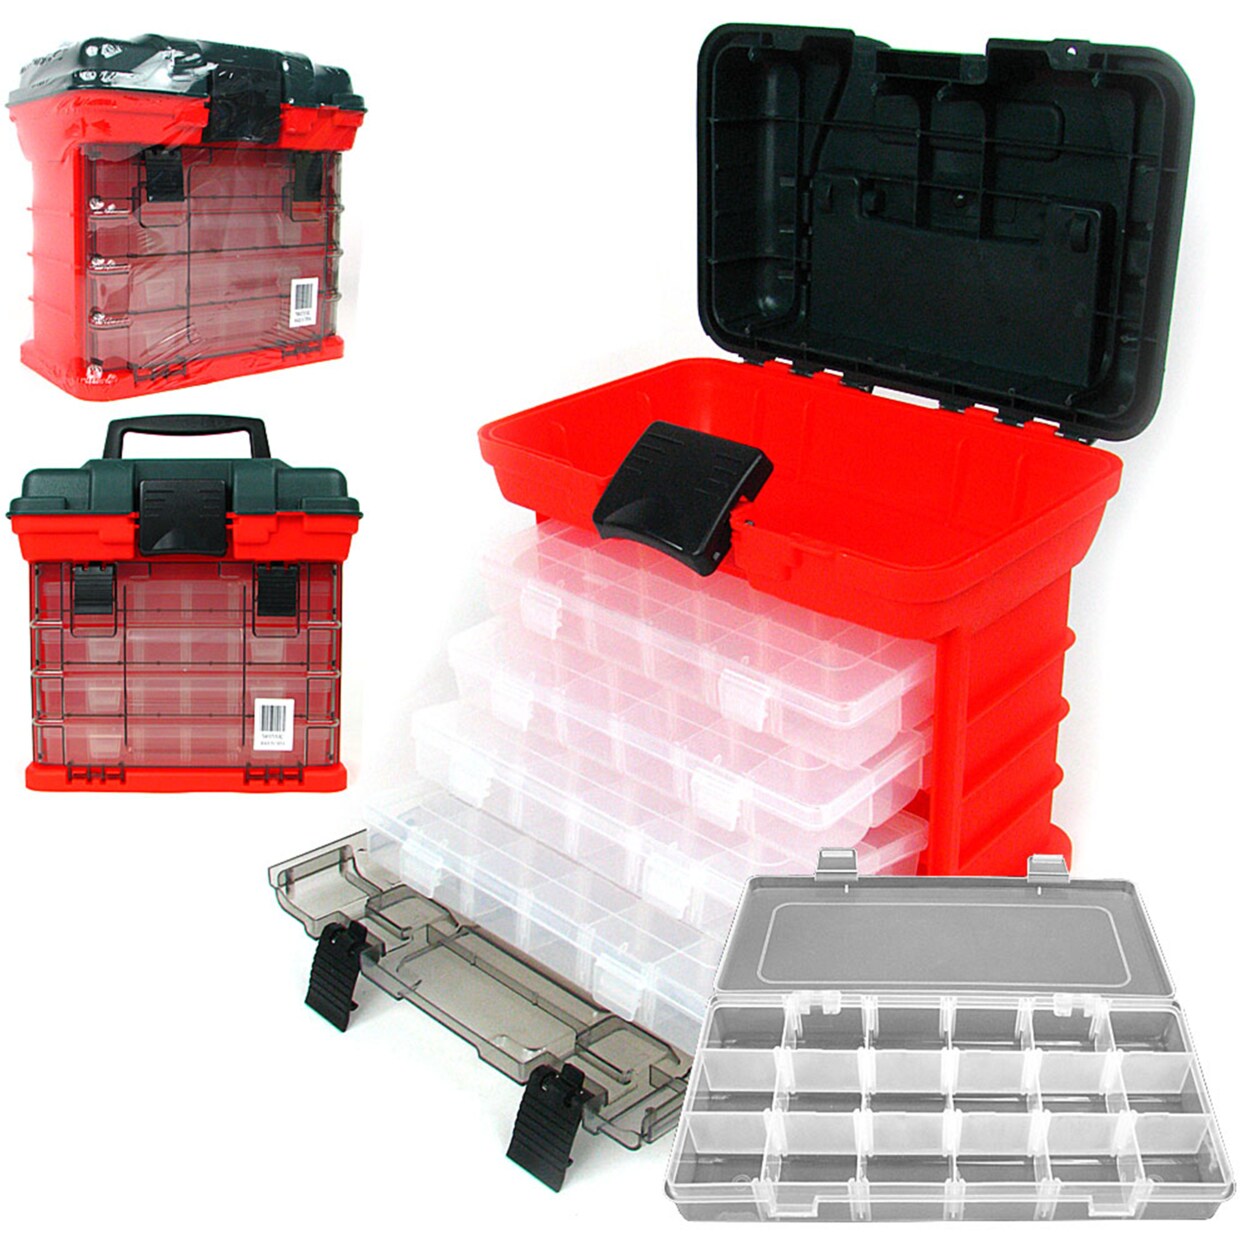 Stalwart Plastic Tool Box Compartments for Jewelry Making Beads Crafts 11 Inch